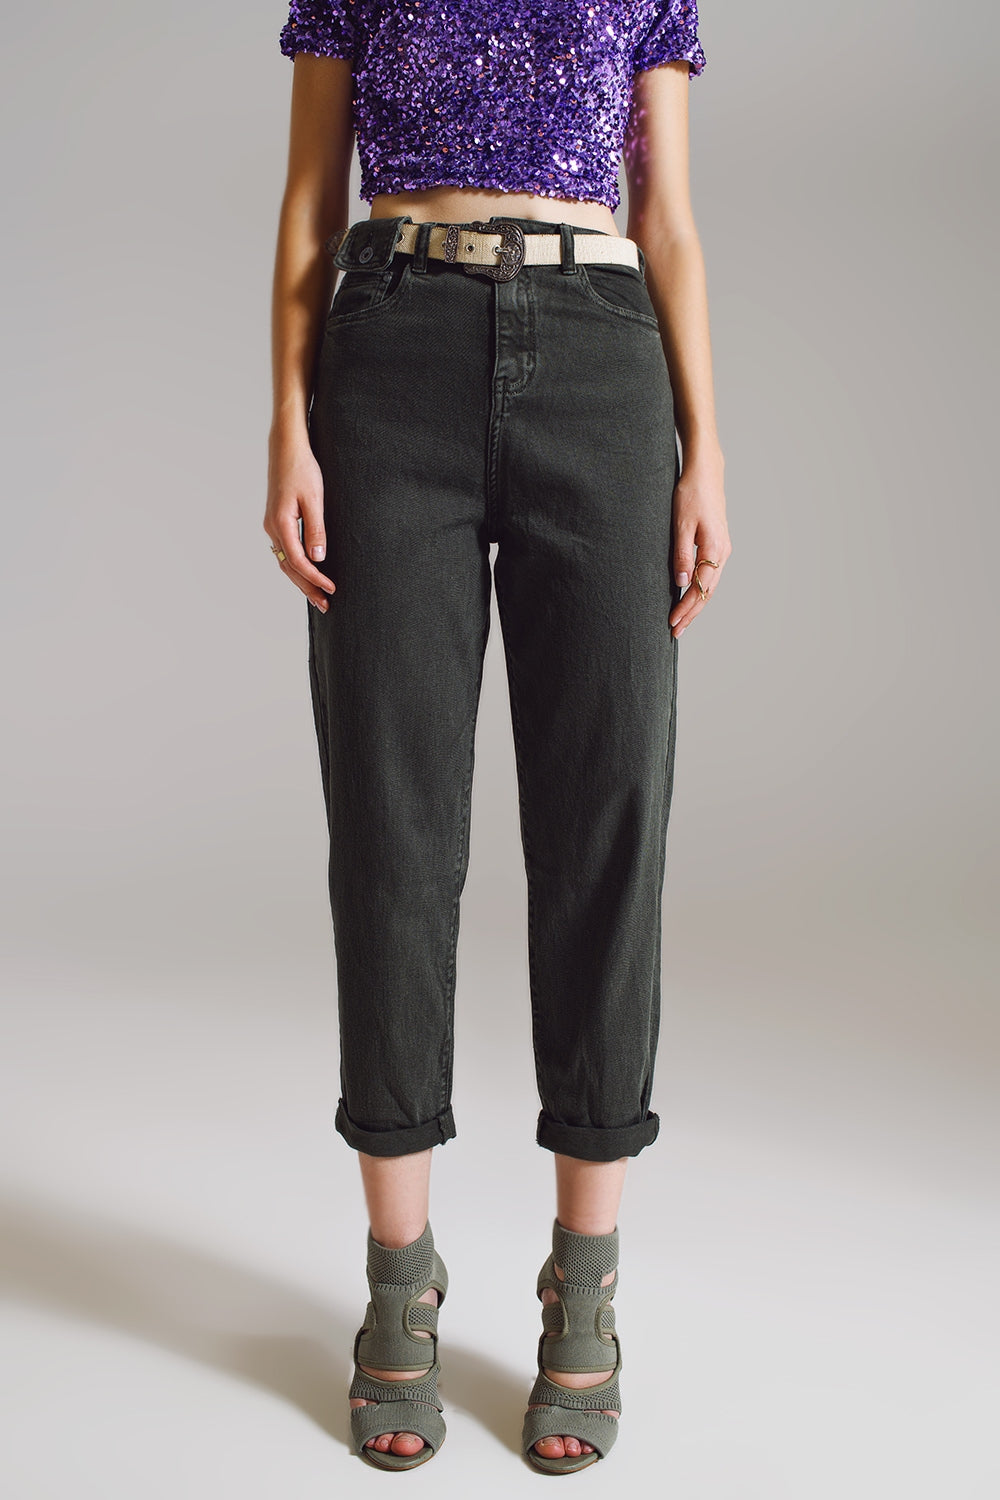 Q2 Khaki green relaxed pants with pocket detail at the waist